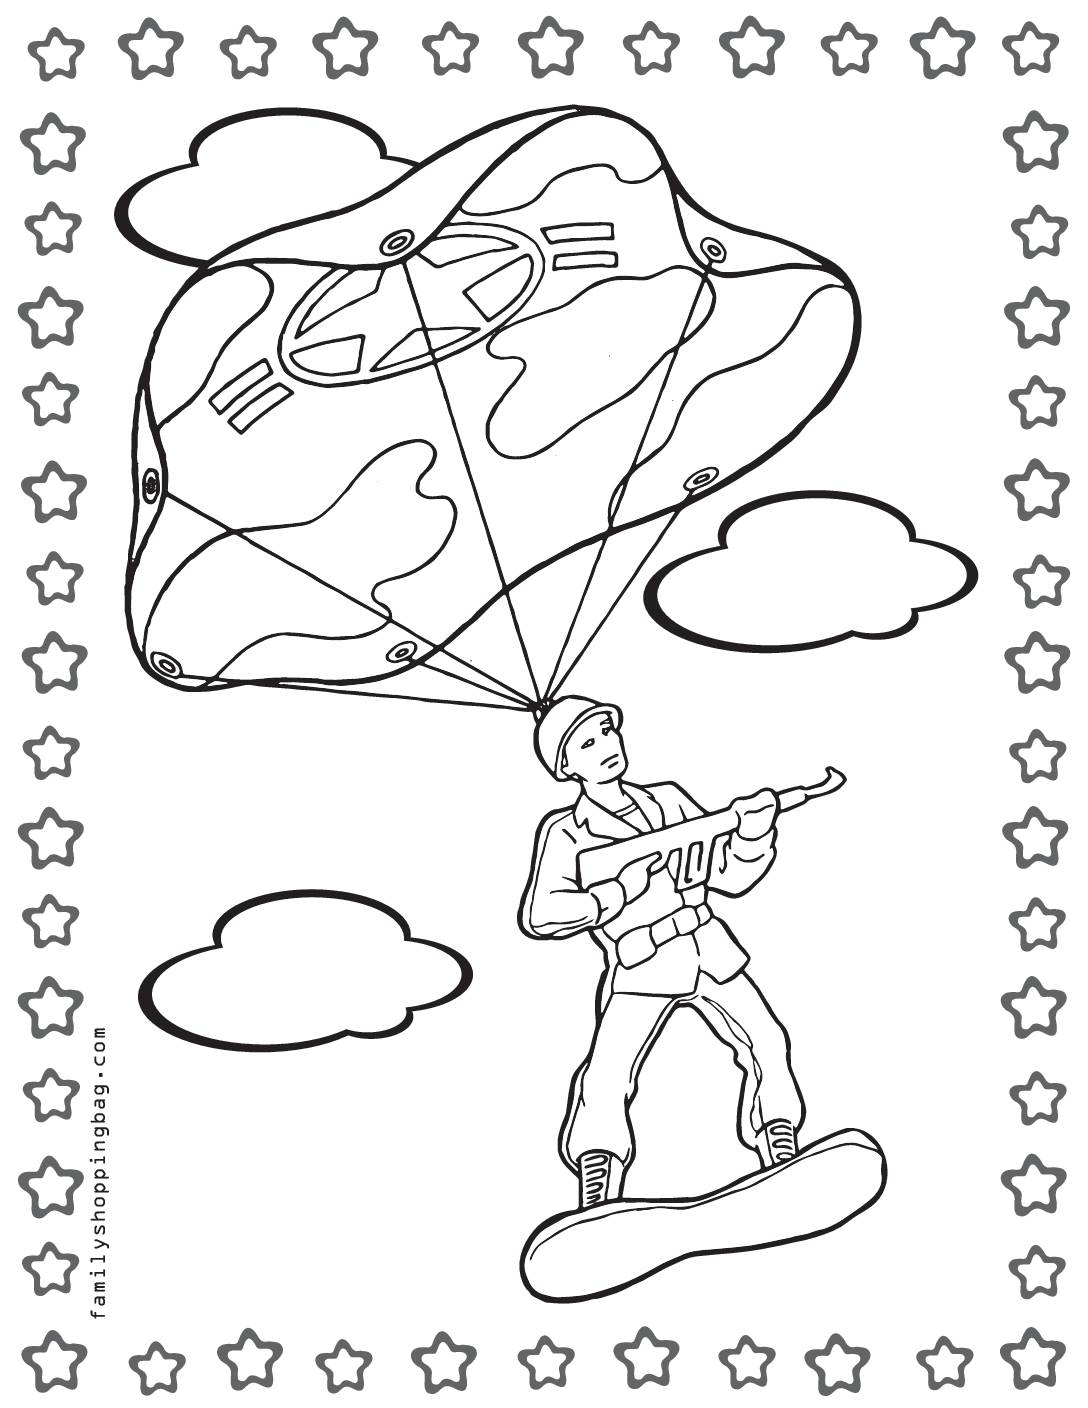 Coloring Page 5 army Coloring Pages